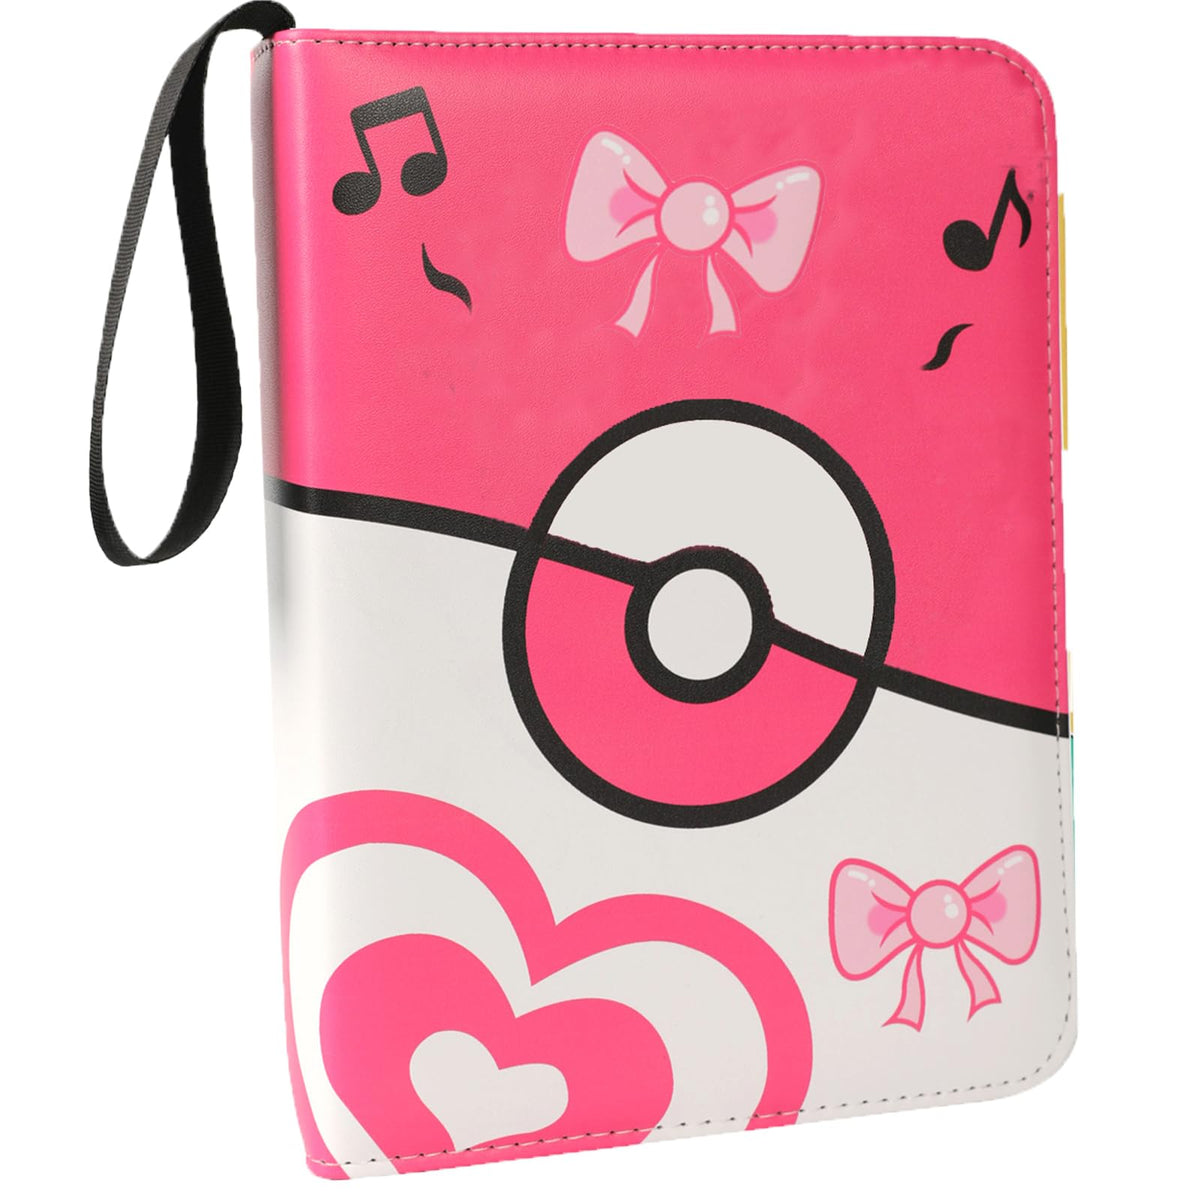 Card Binder 4-Pocket with 55 Removable Sheets Holds 440 Cards, Portable Waterproof Trading Card Holder for Game Cards, Yugioh, MTG, Trading Card Holder Gifts for Boys Girls (Pink)